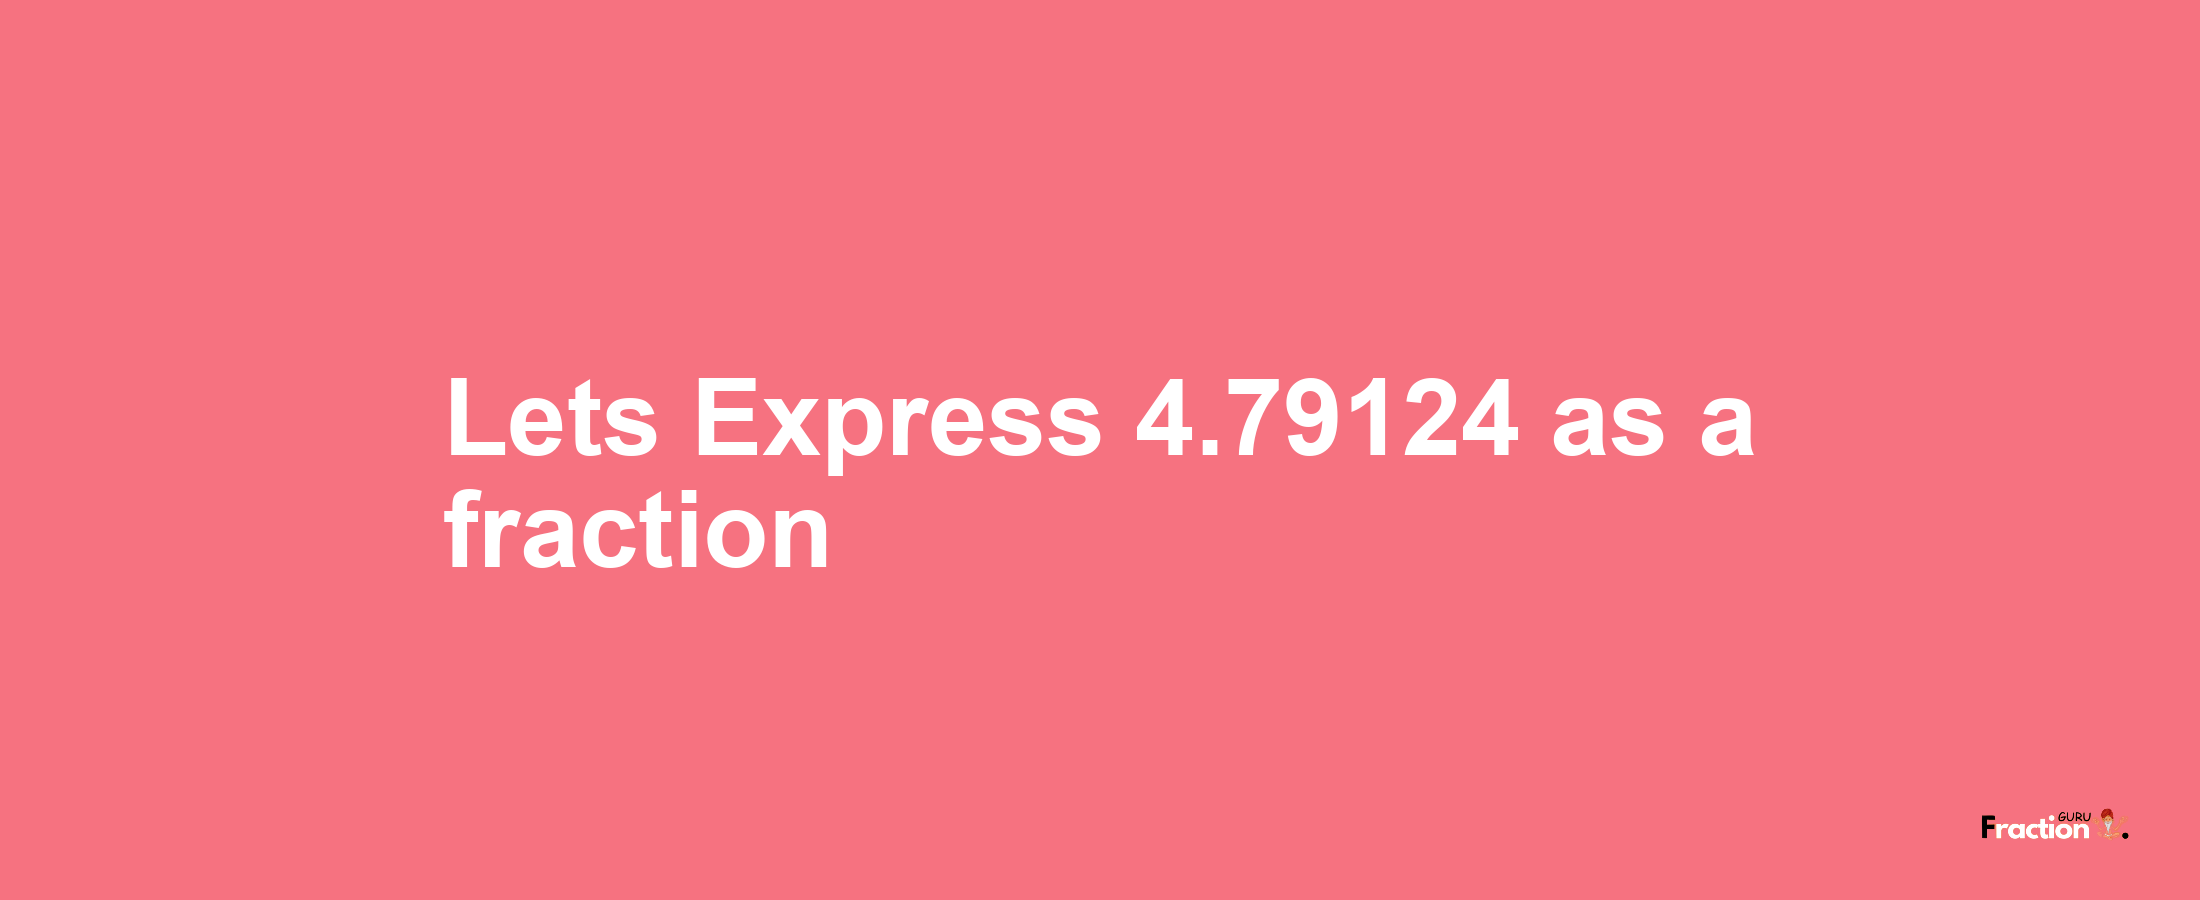 Lets Express 4.79124 as afraction